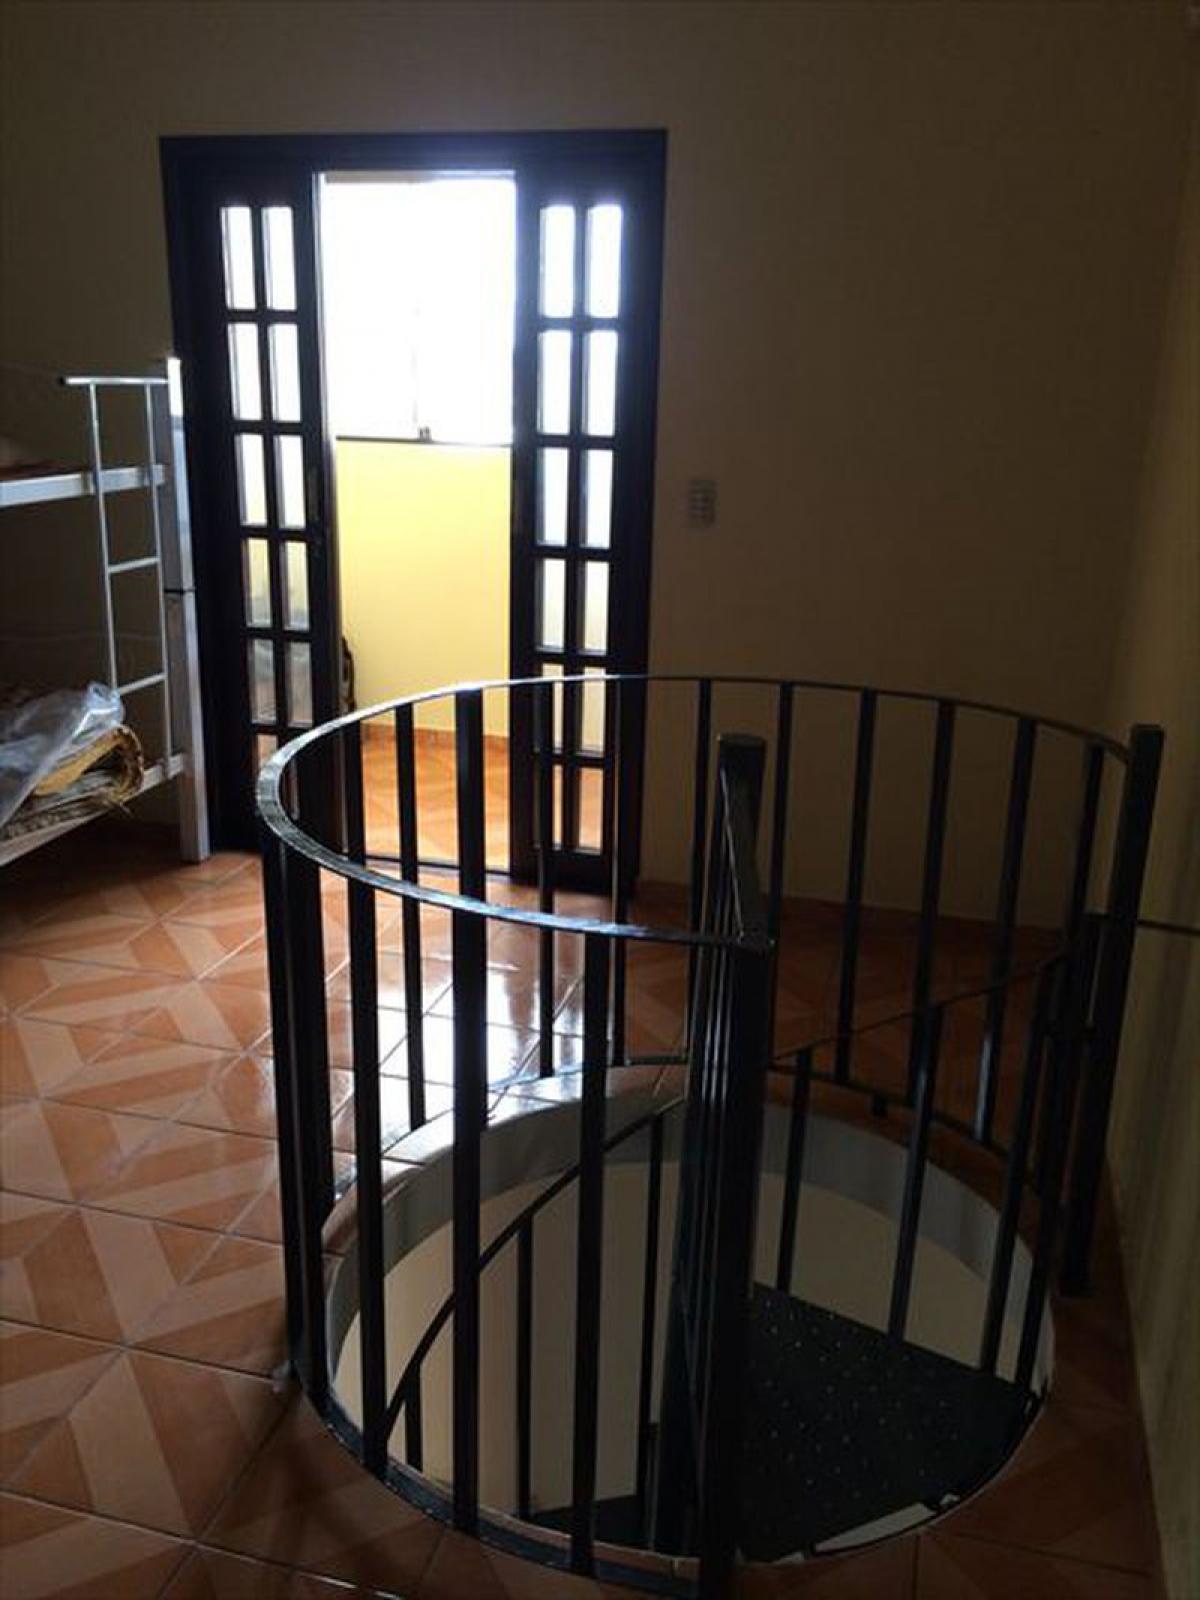 Picture of Townhome For Sale in Jacarei, Sao Paulo, Brazil